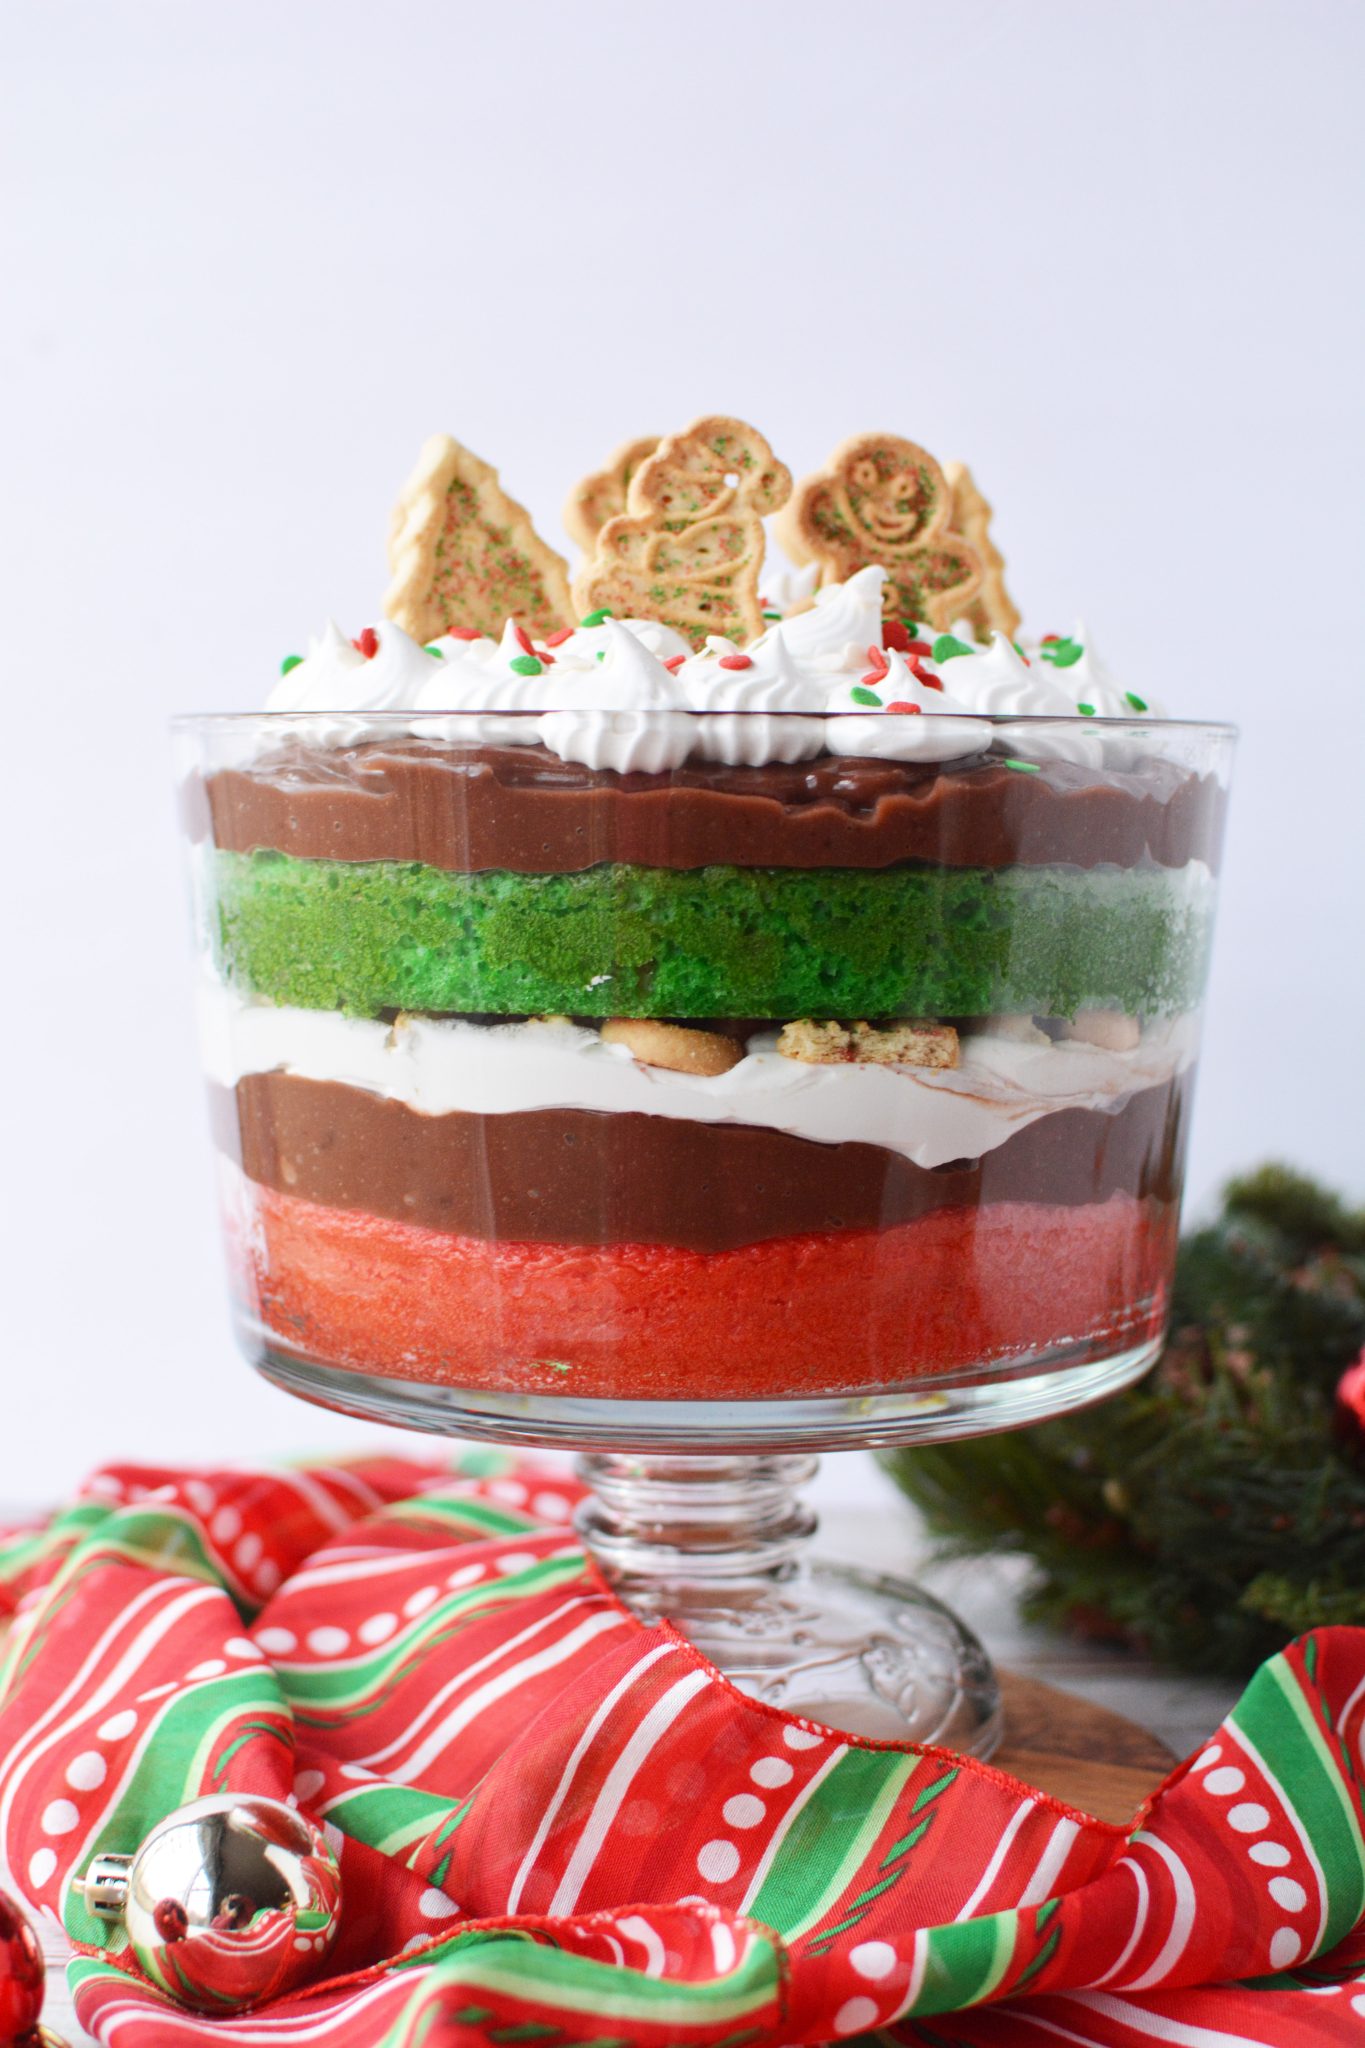 How to Make a Christmas Trifle Recipe Tutorial - The Rebel Chick